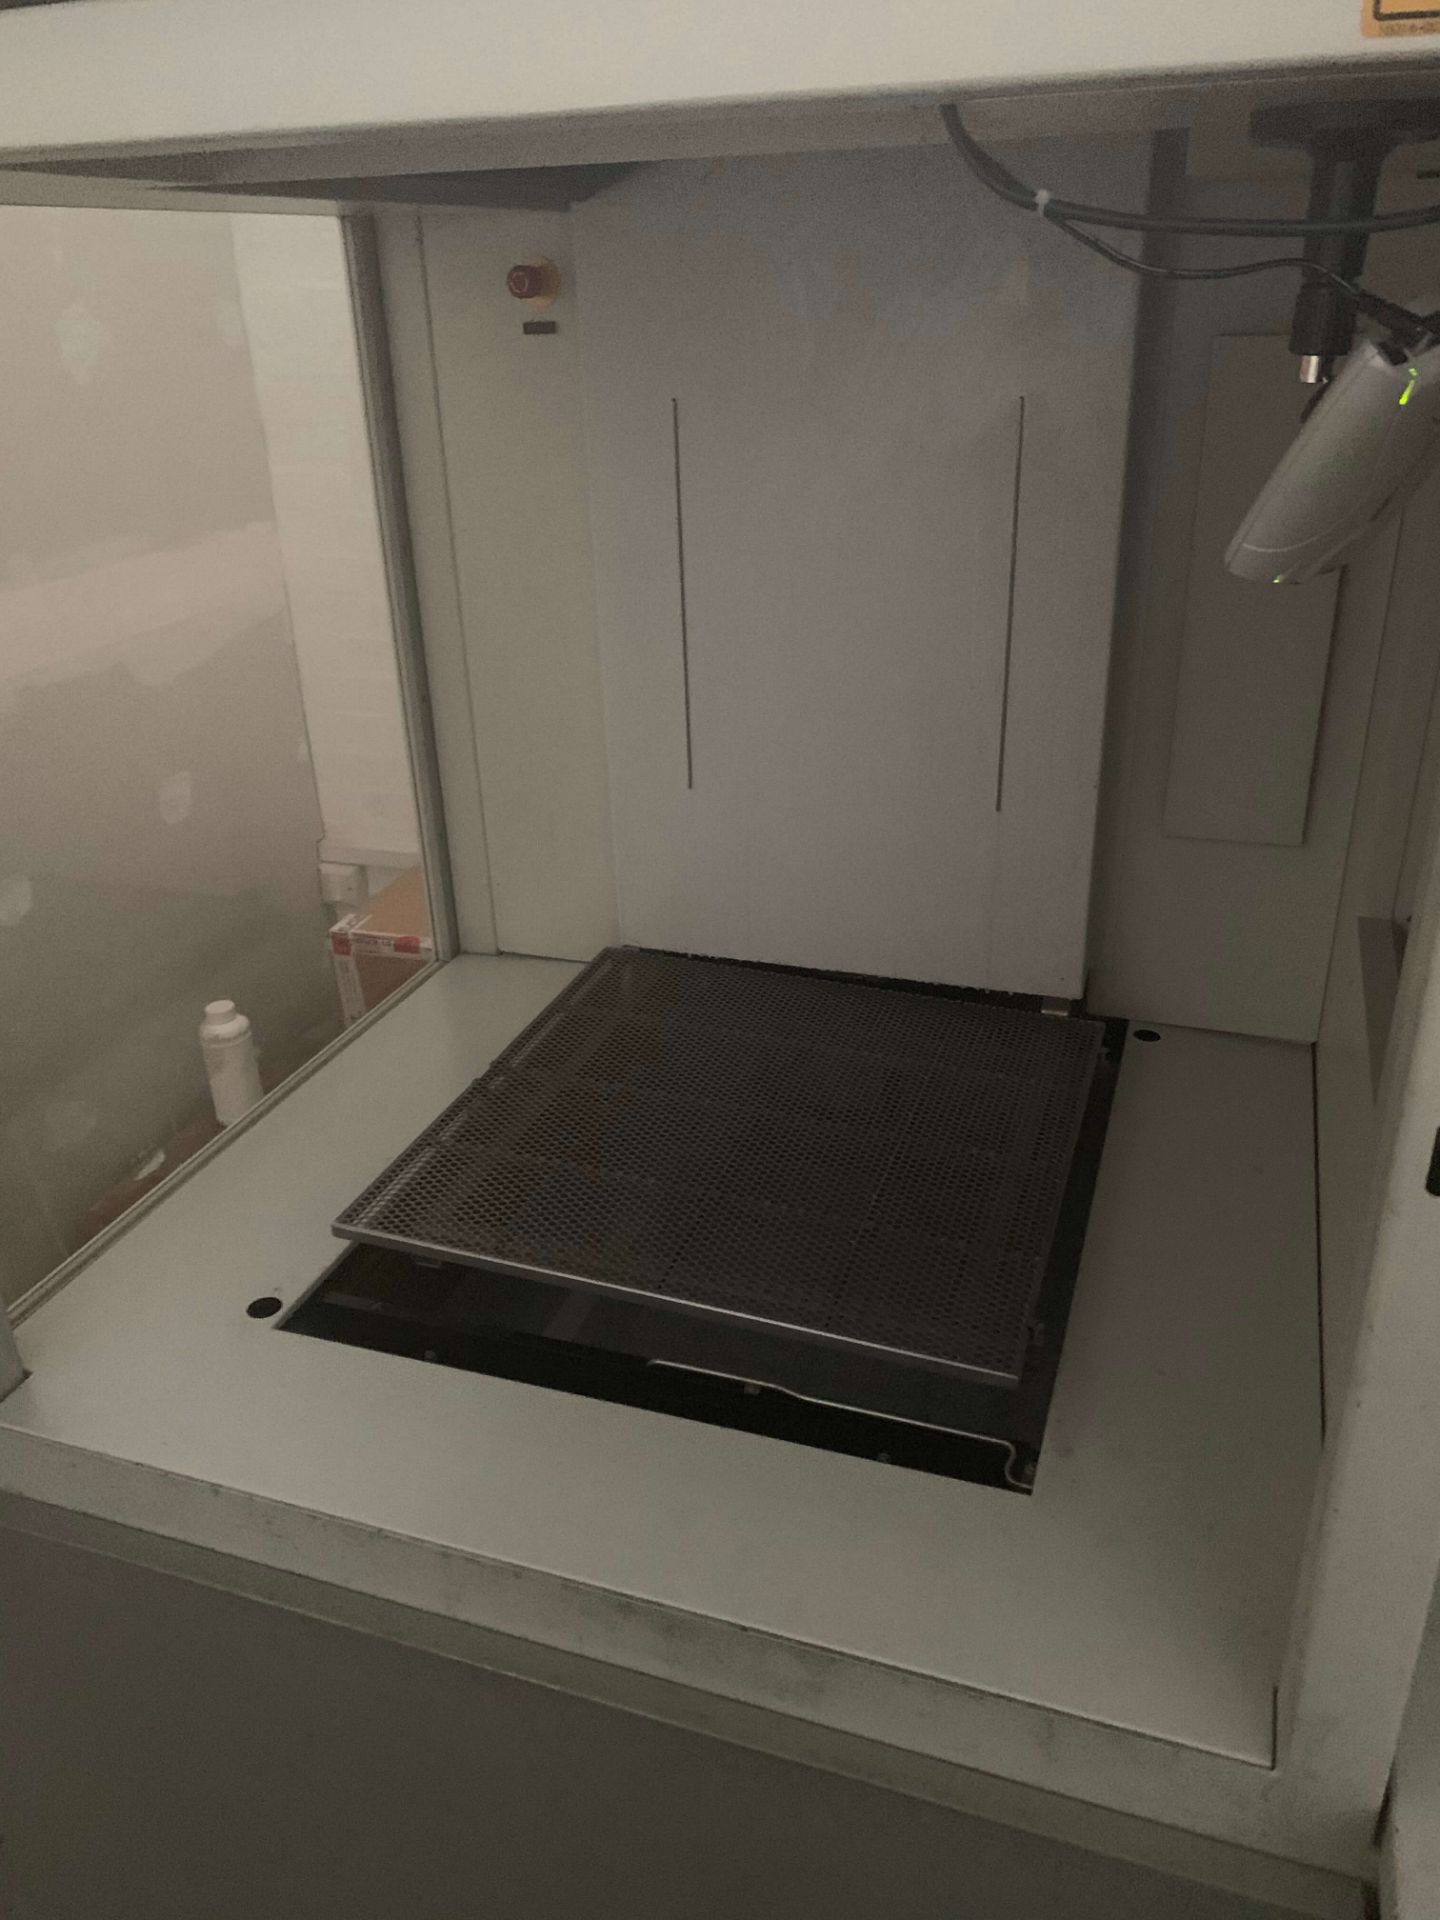 3D Systems SLA5000 500 x 500 x 500mm stereo lithography 3D PRINTER - Image 4 of 6